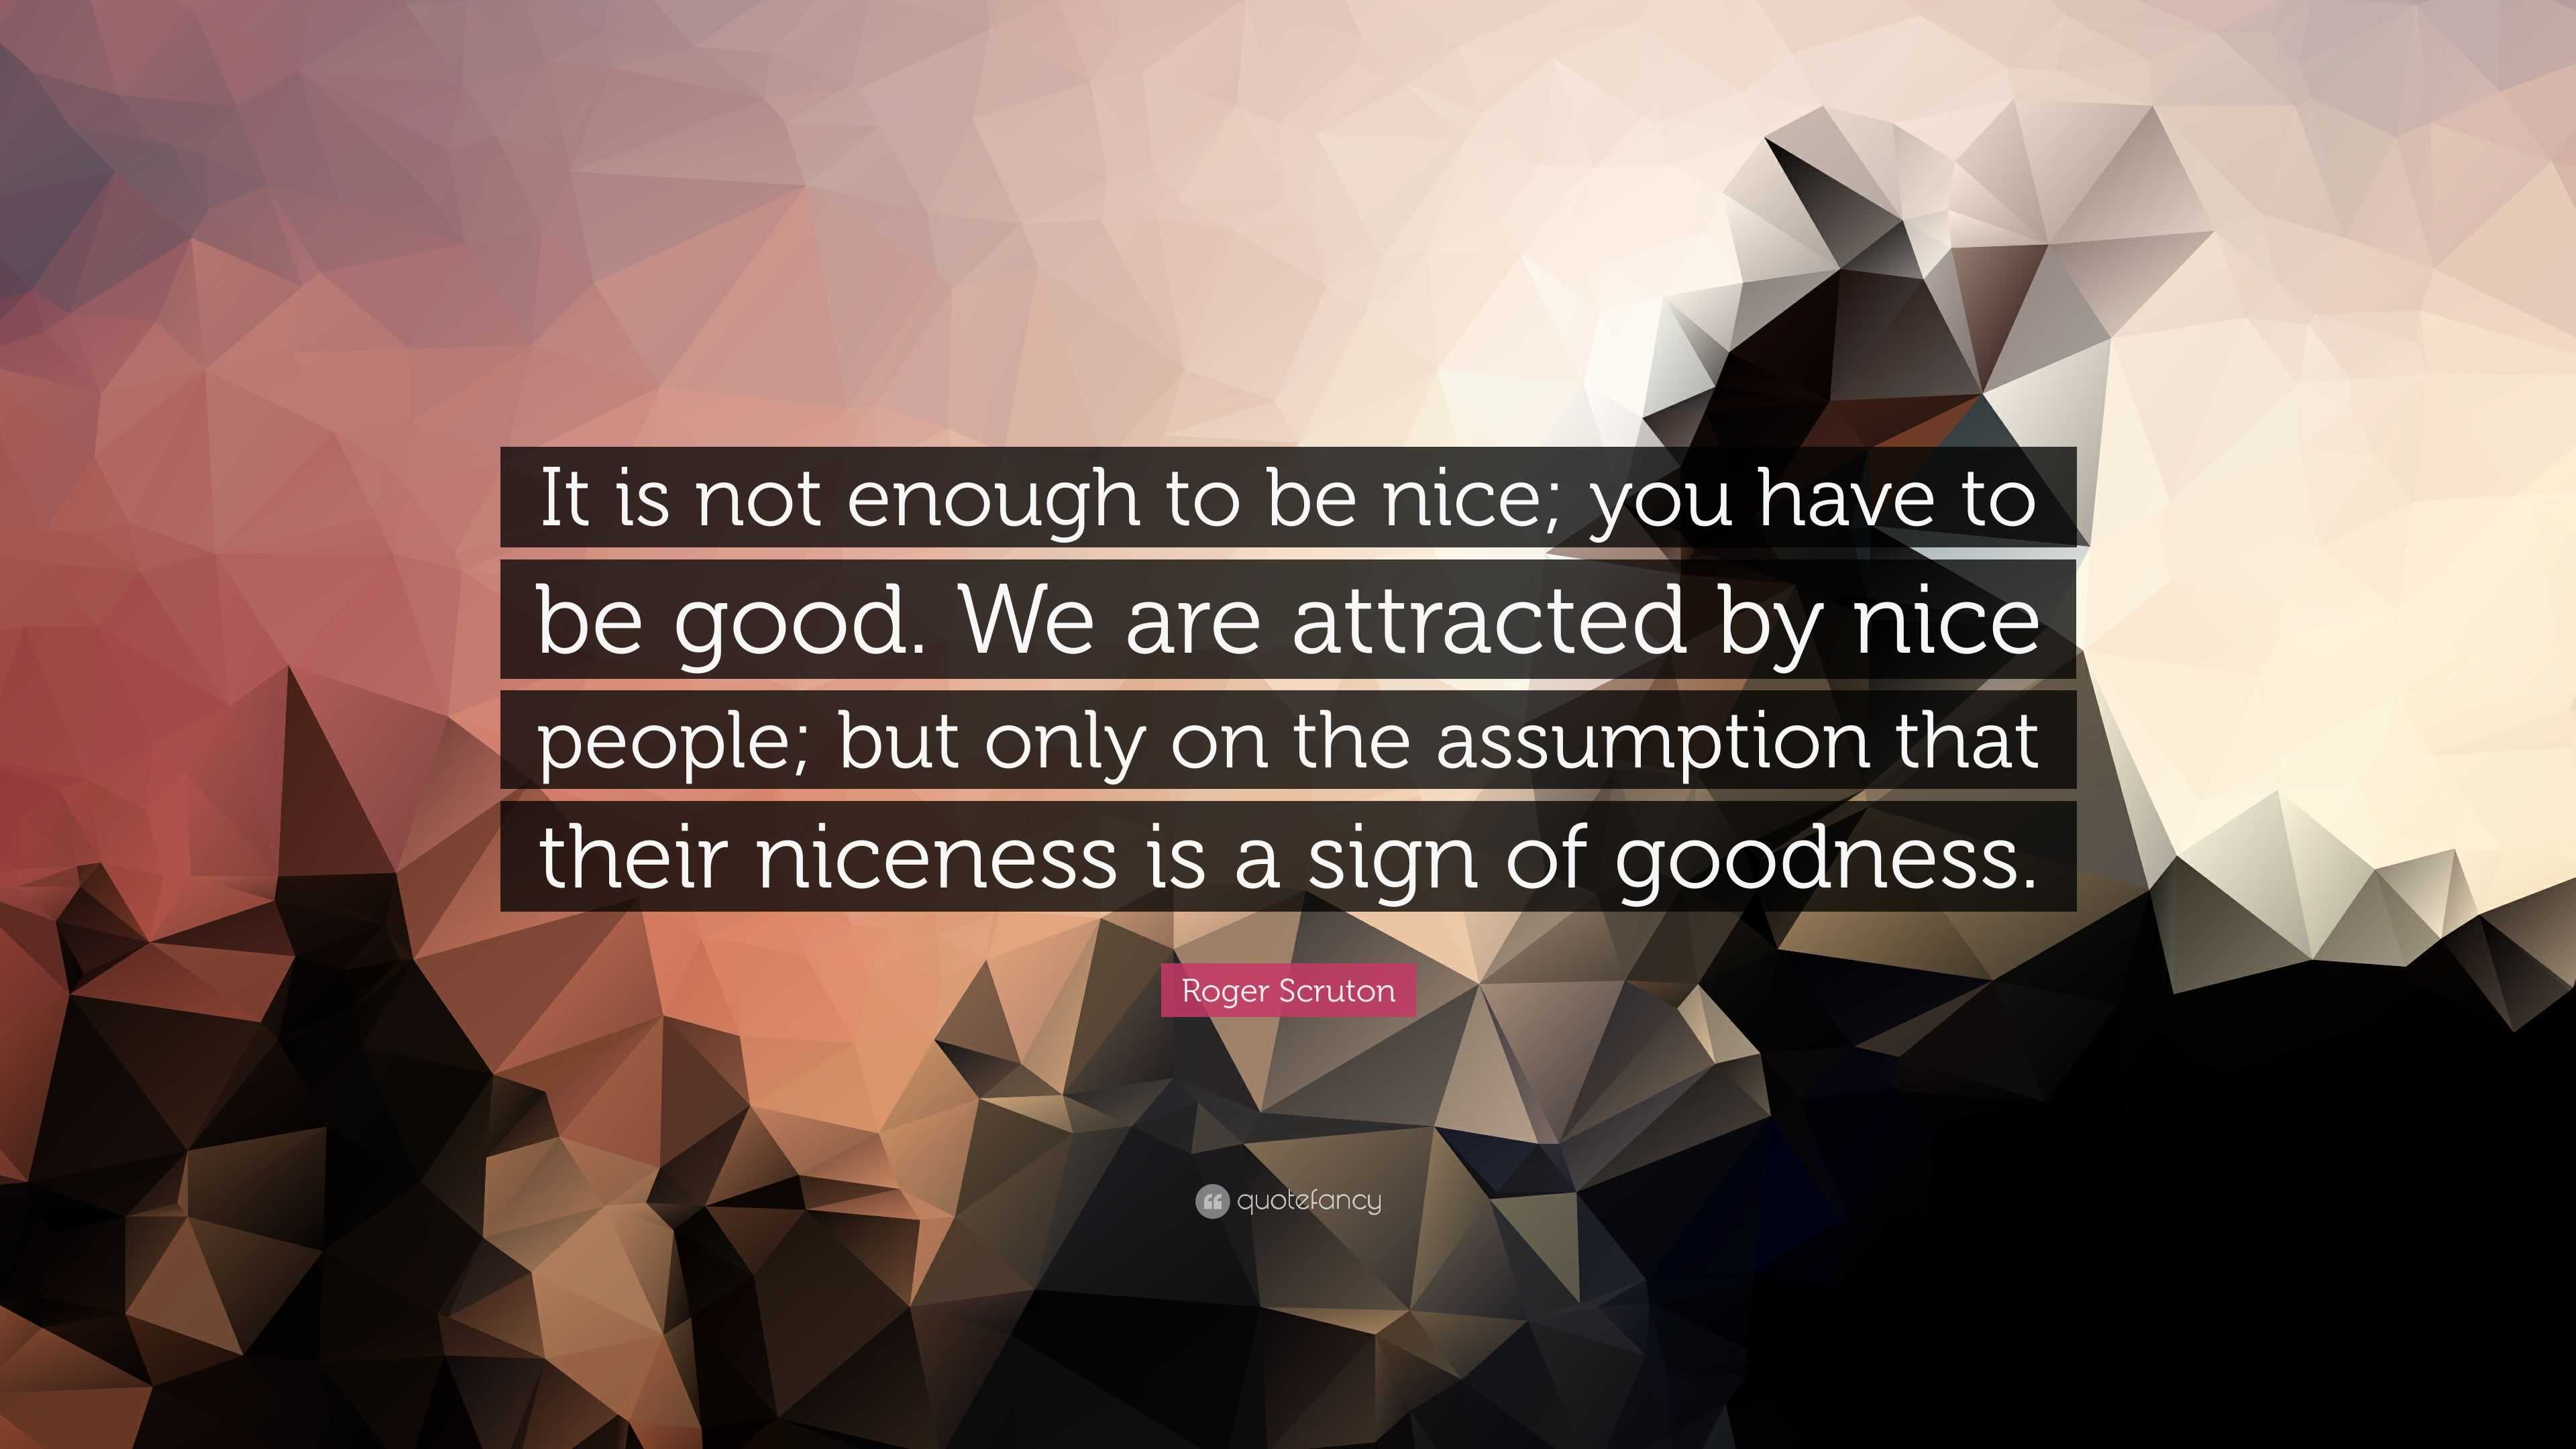 Roger Scruton Quote: “It is not enough to be nice; you have